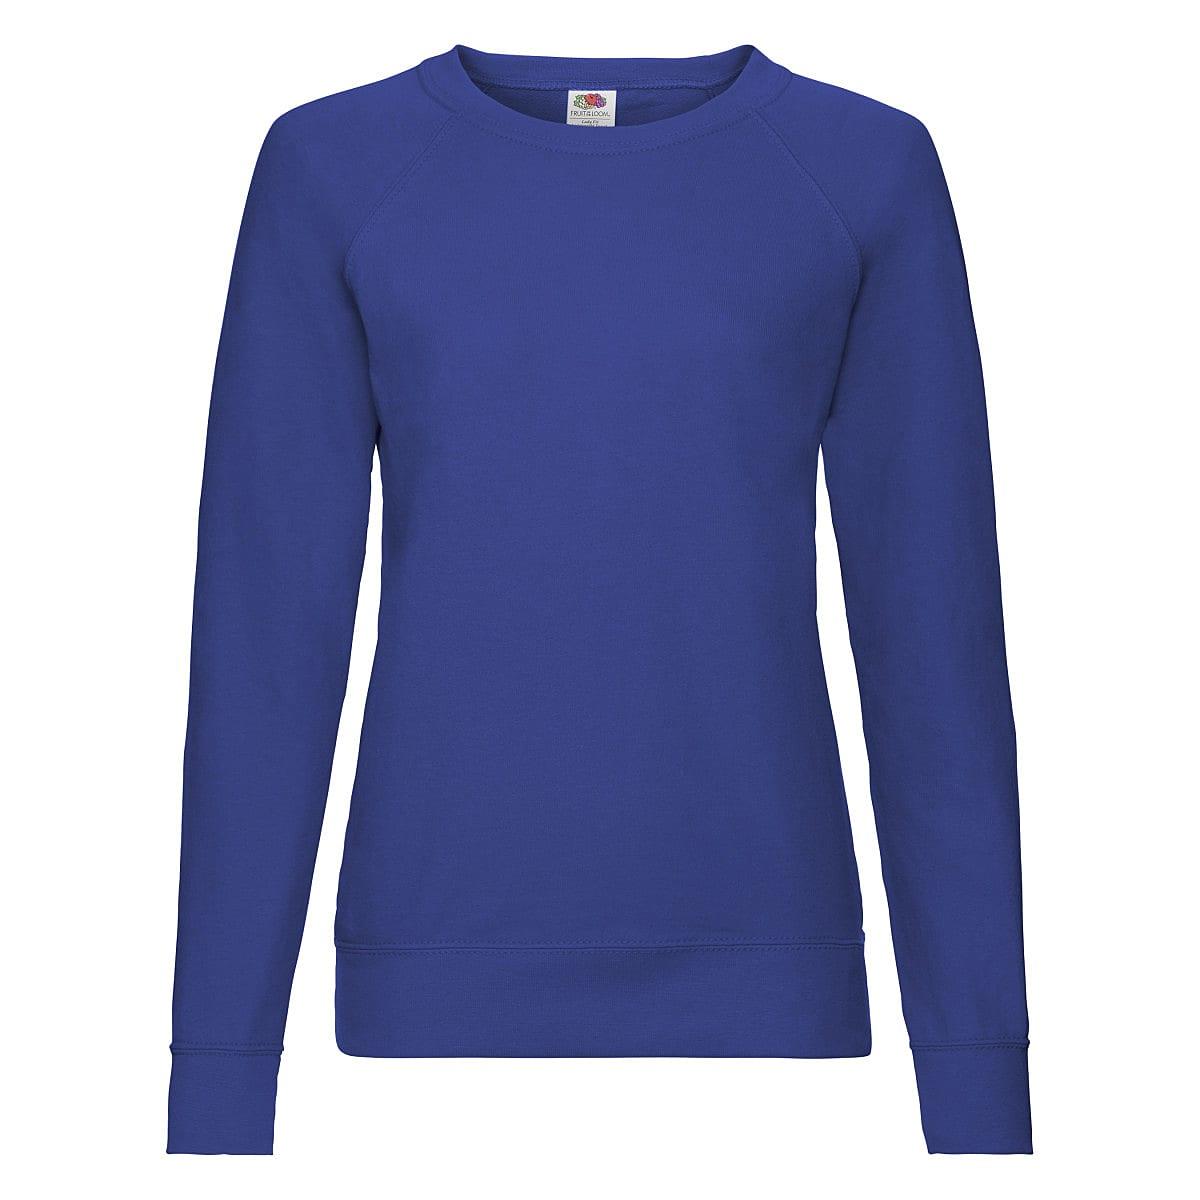 Fruit Of The Loom Lady-Fit Lightweight Raglan Sweater in Royal Blue (Product Code: 62146)